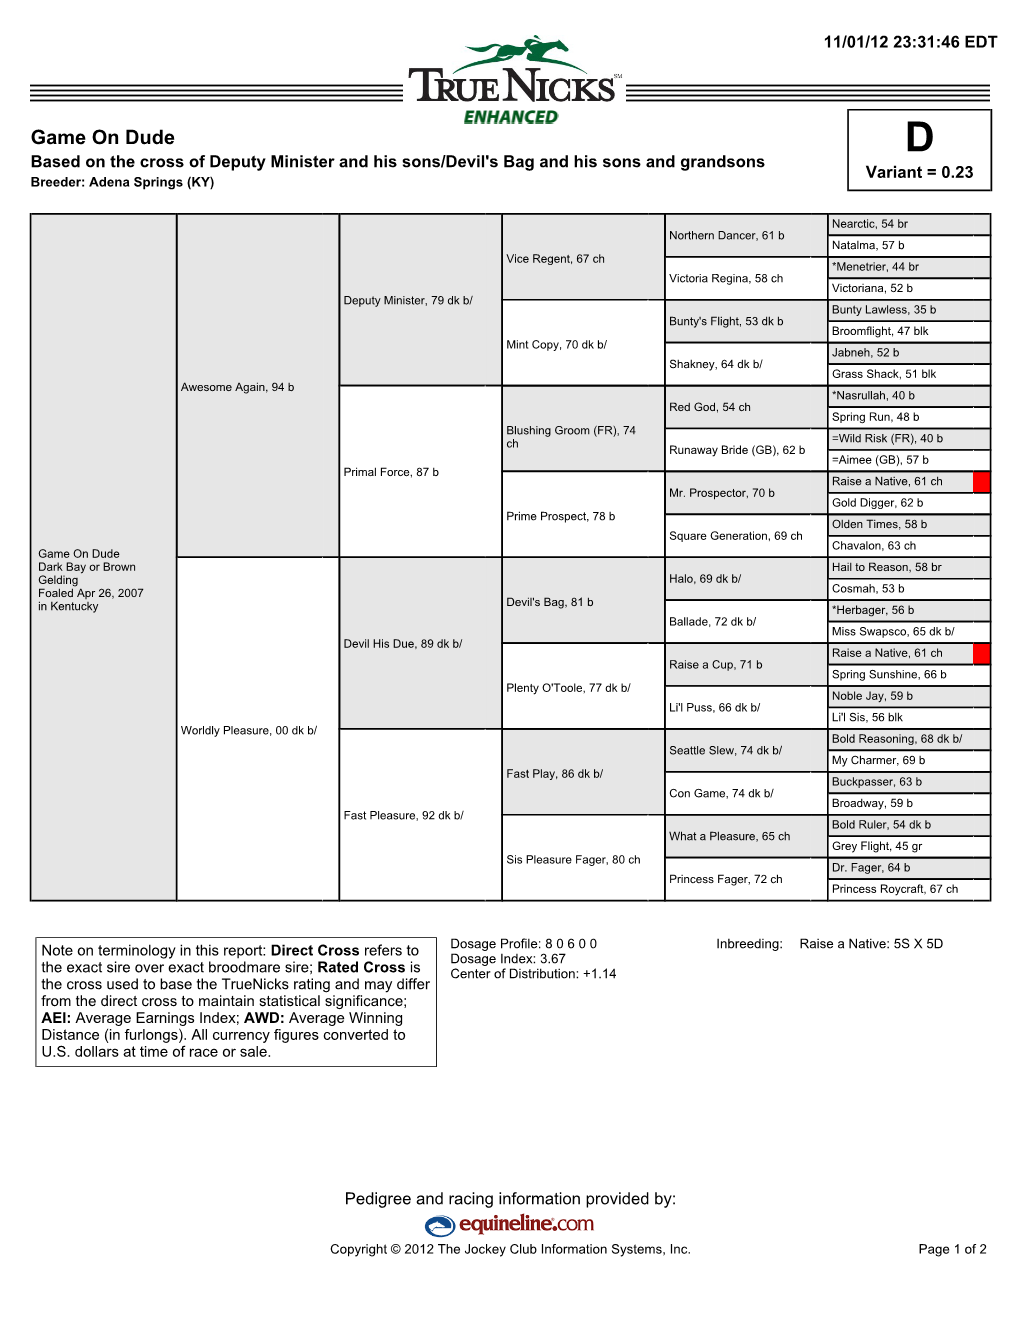 Game on Dude D Based on the Cross of Deputy Minister and His Sons/Devil's Bag and His Sons and Grandsons Variant = 0.23 Breeder: Adena Springs (KY)